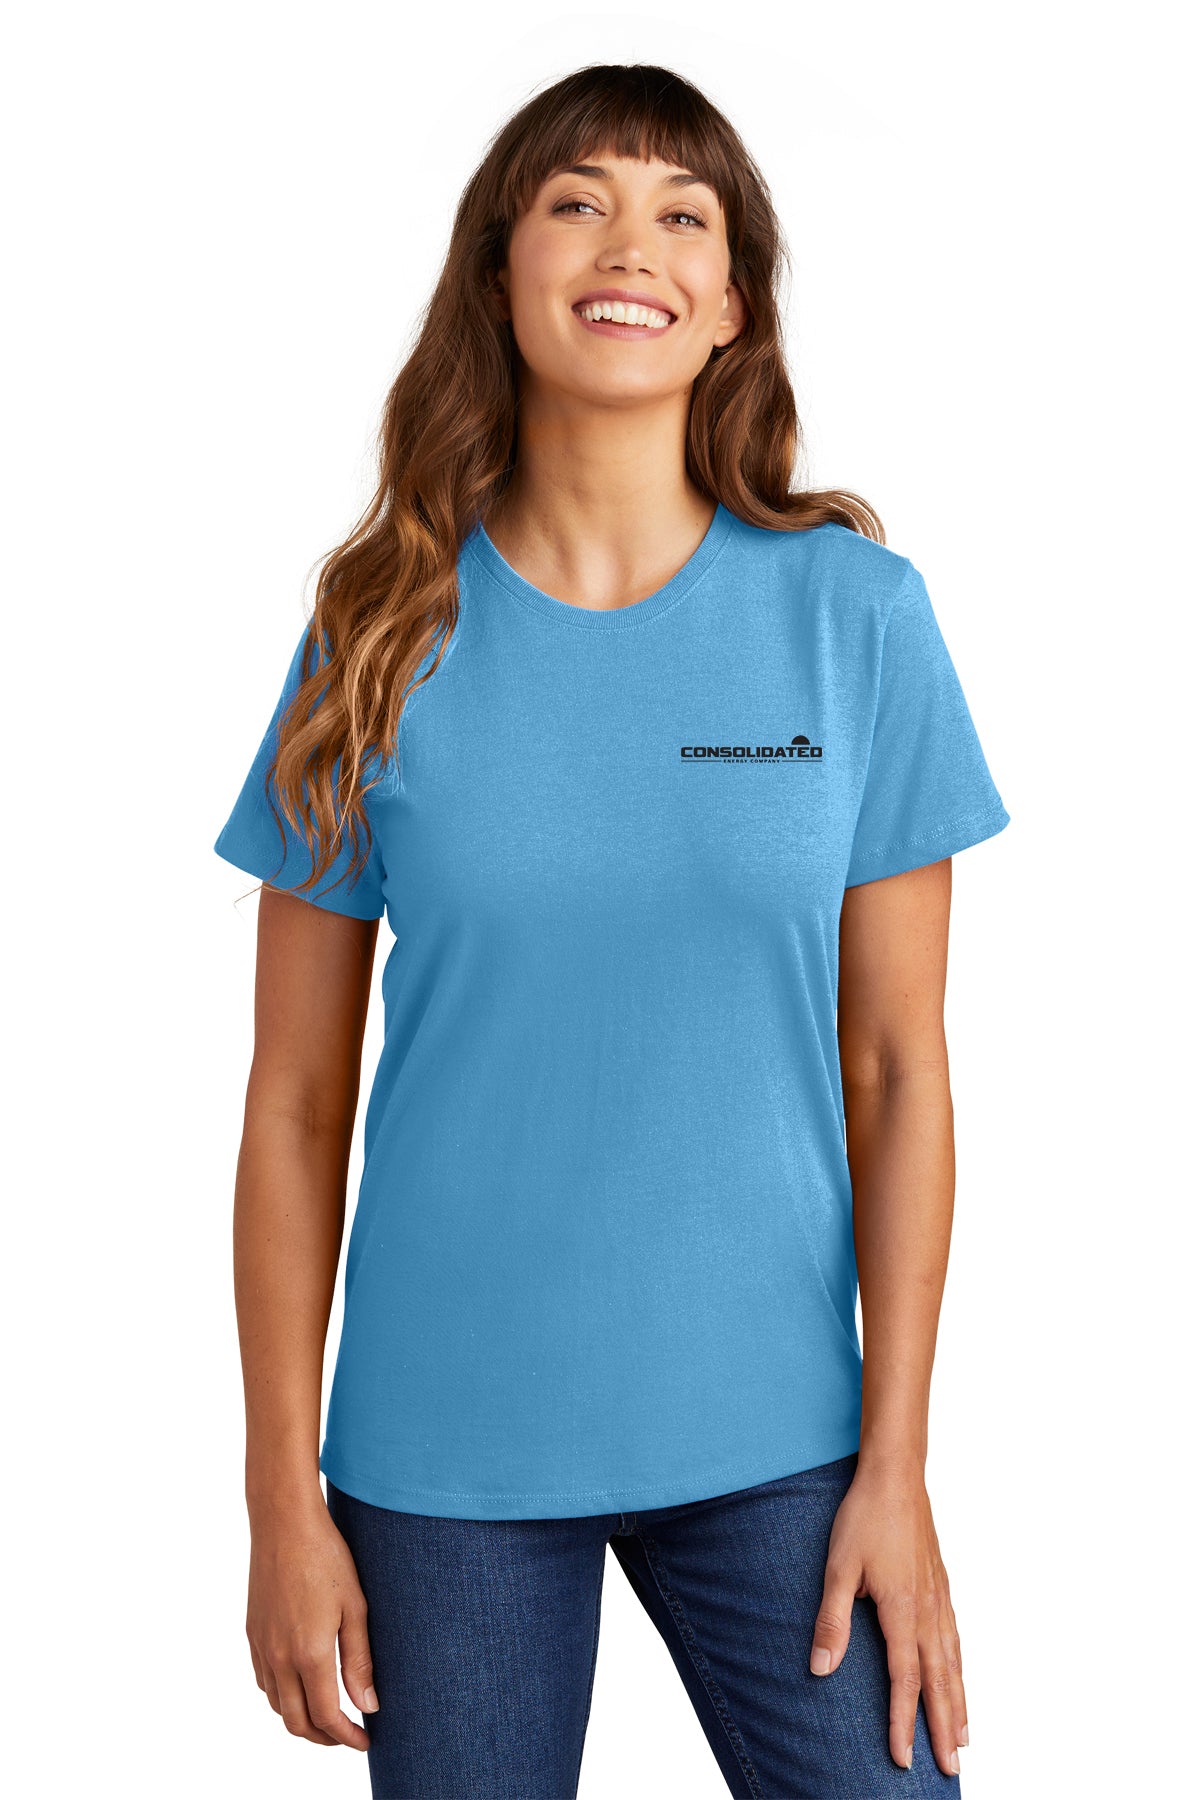 Consolidated Energy Ladies Tee – Multiple Colors